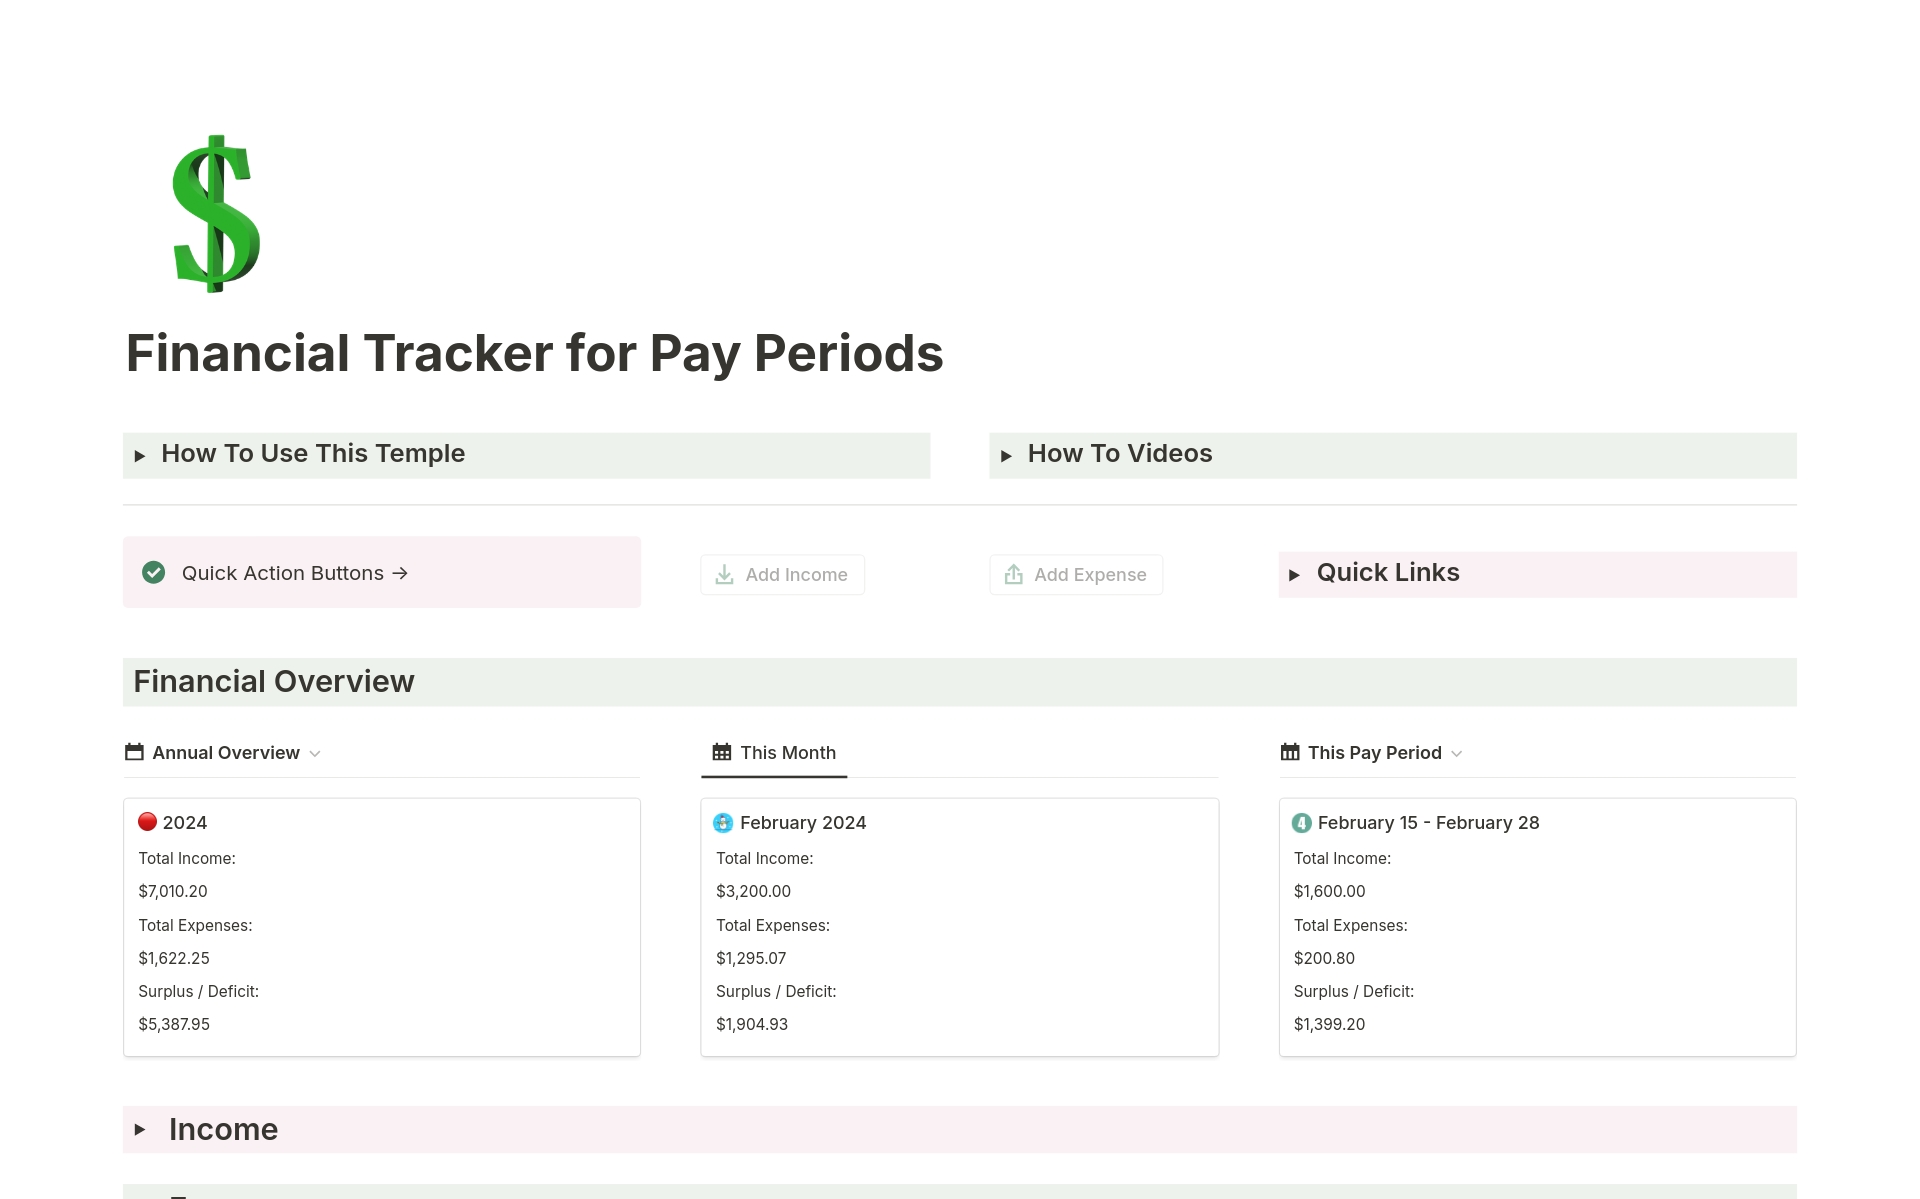 Financial Tracker, complete with video instruction, for managing your income and spending by year, month, and pay period.